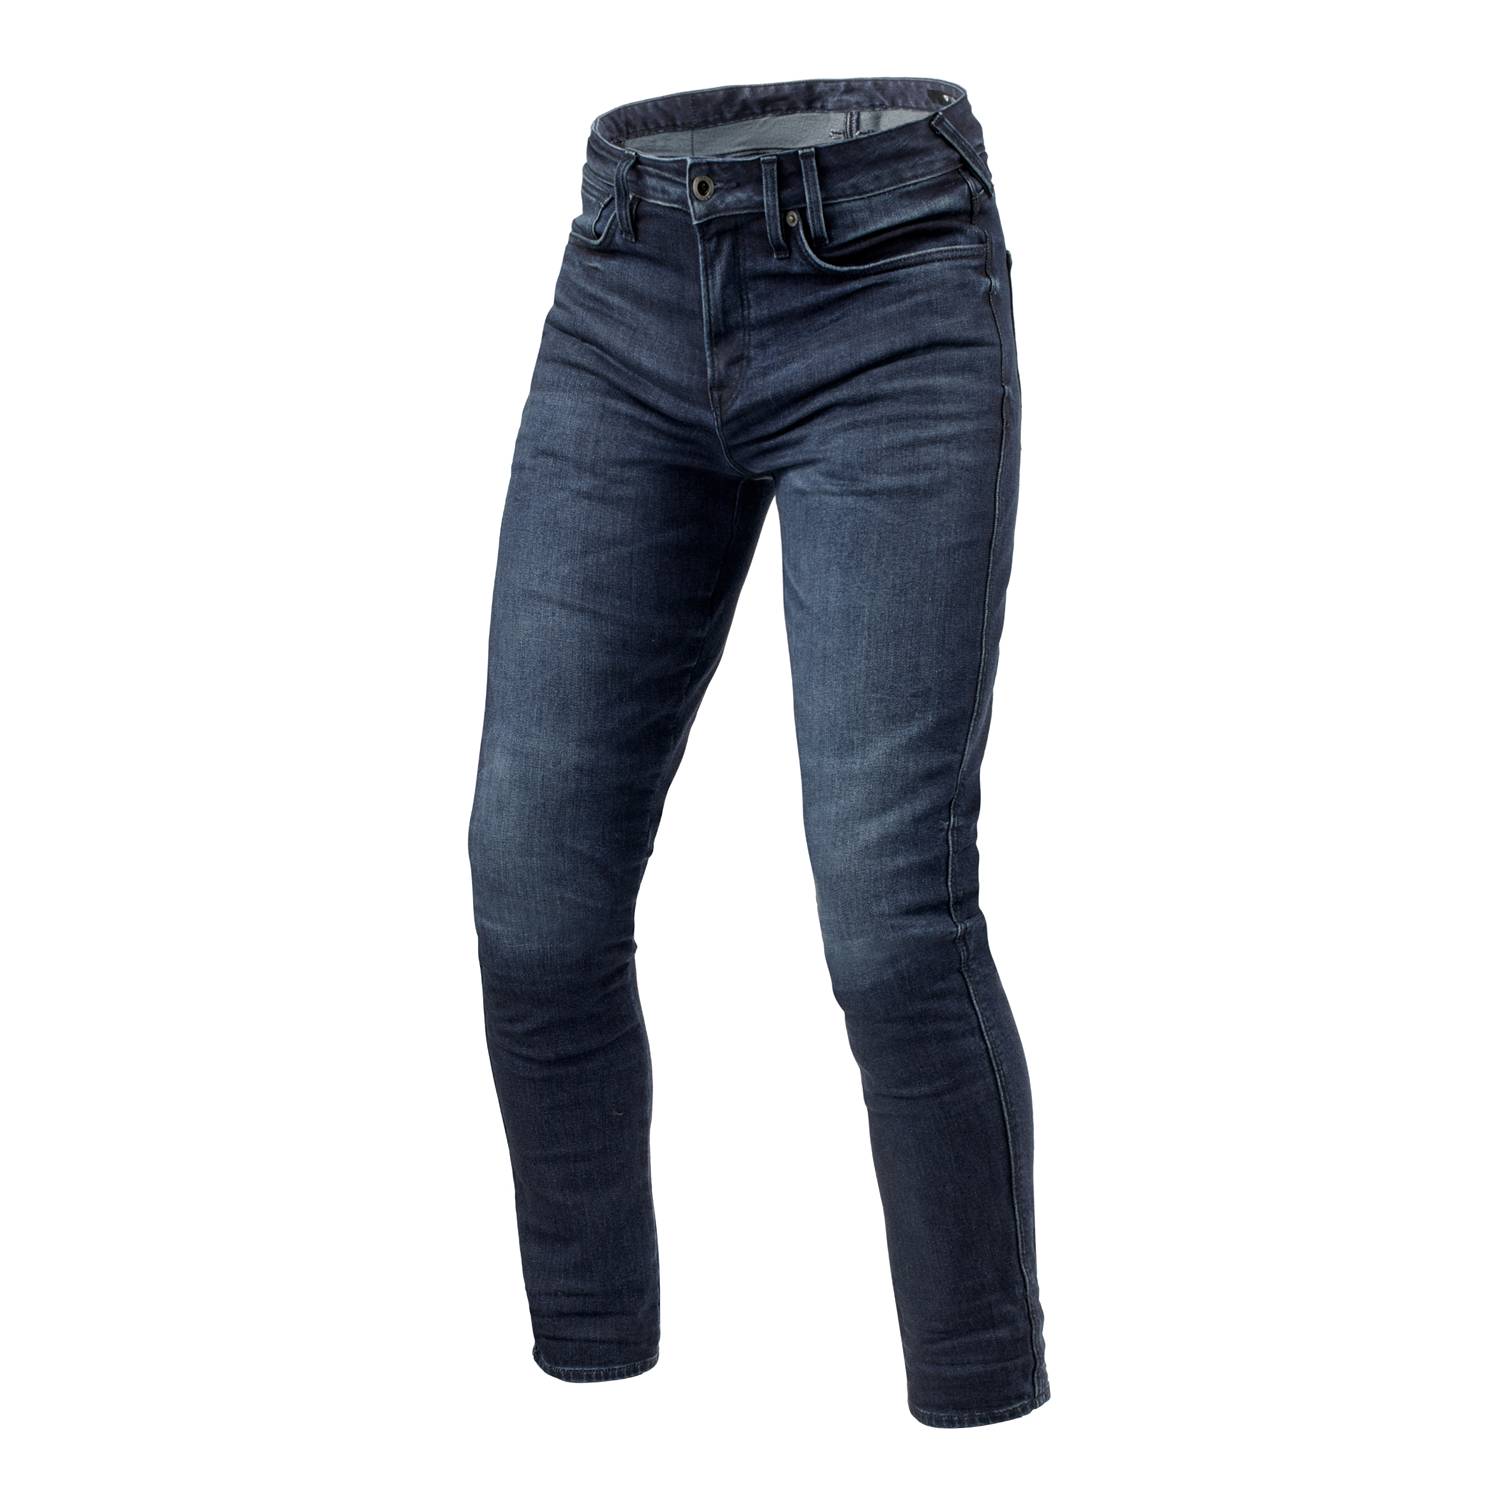 Image of EU REV'IT! Jeans Carlin SK Dark Blue Used L32 Motorcycle Jeans Taille L32/W33